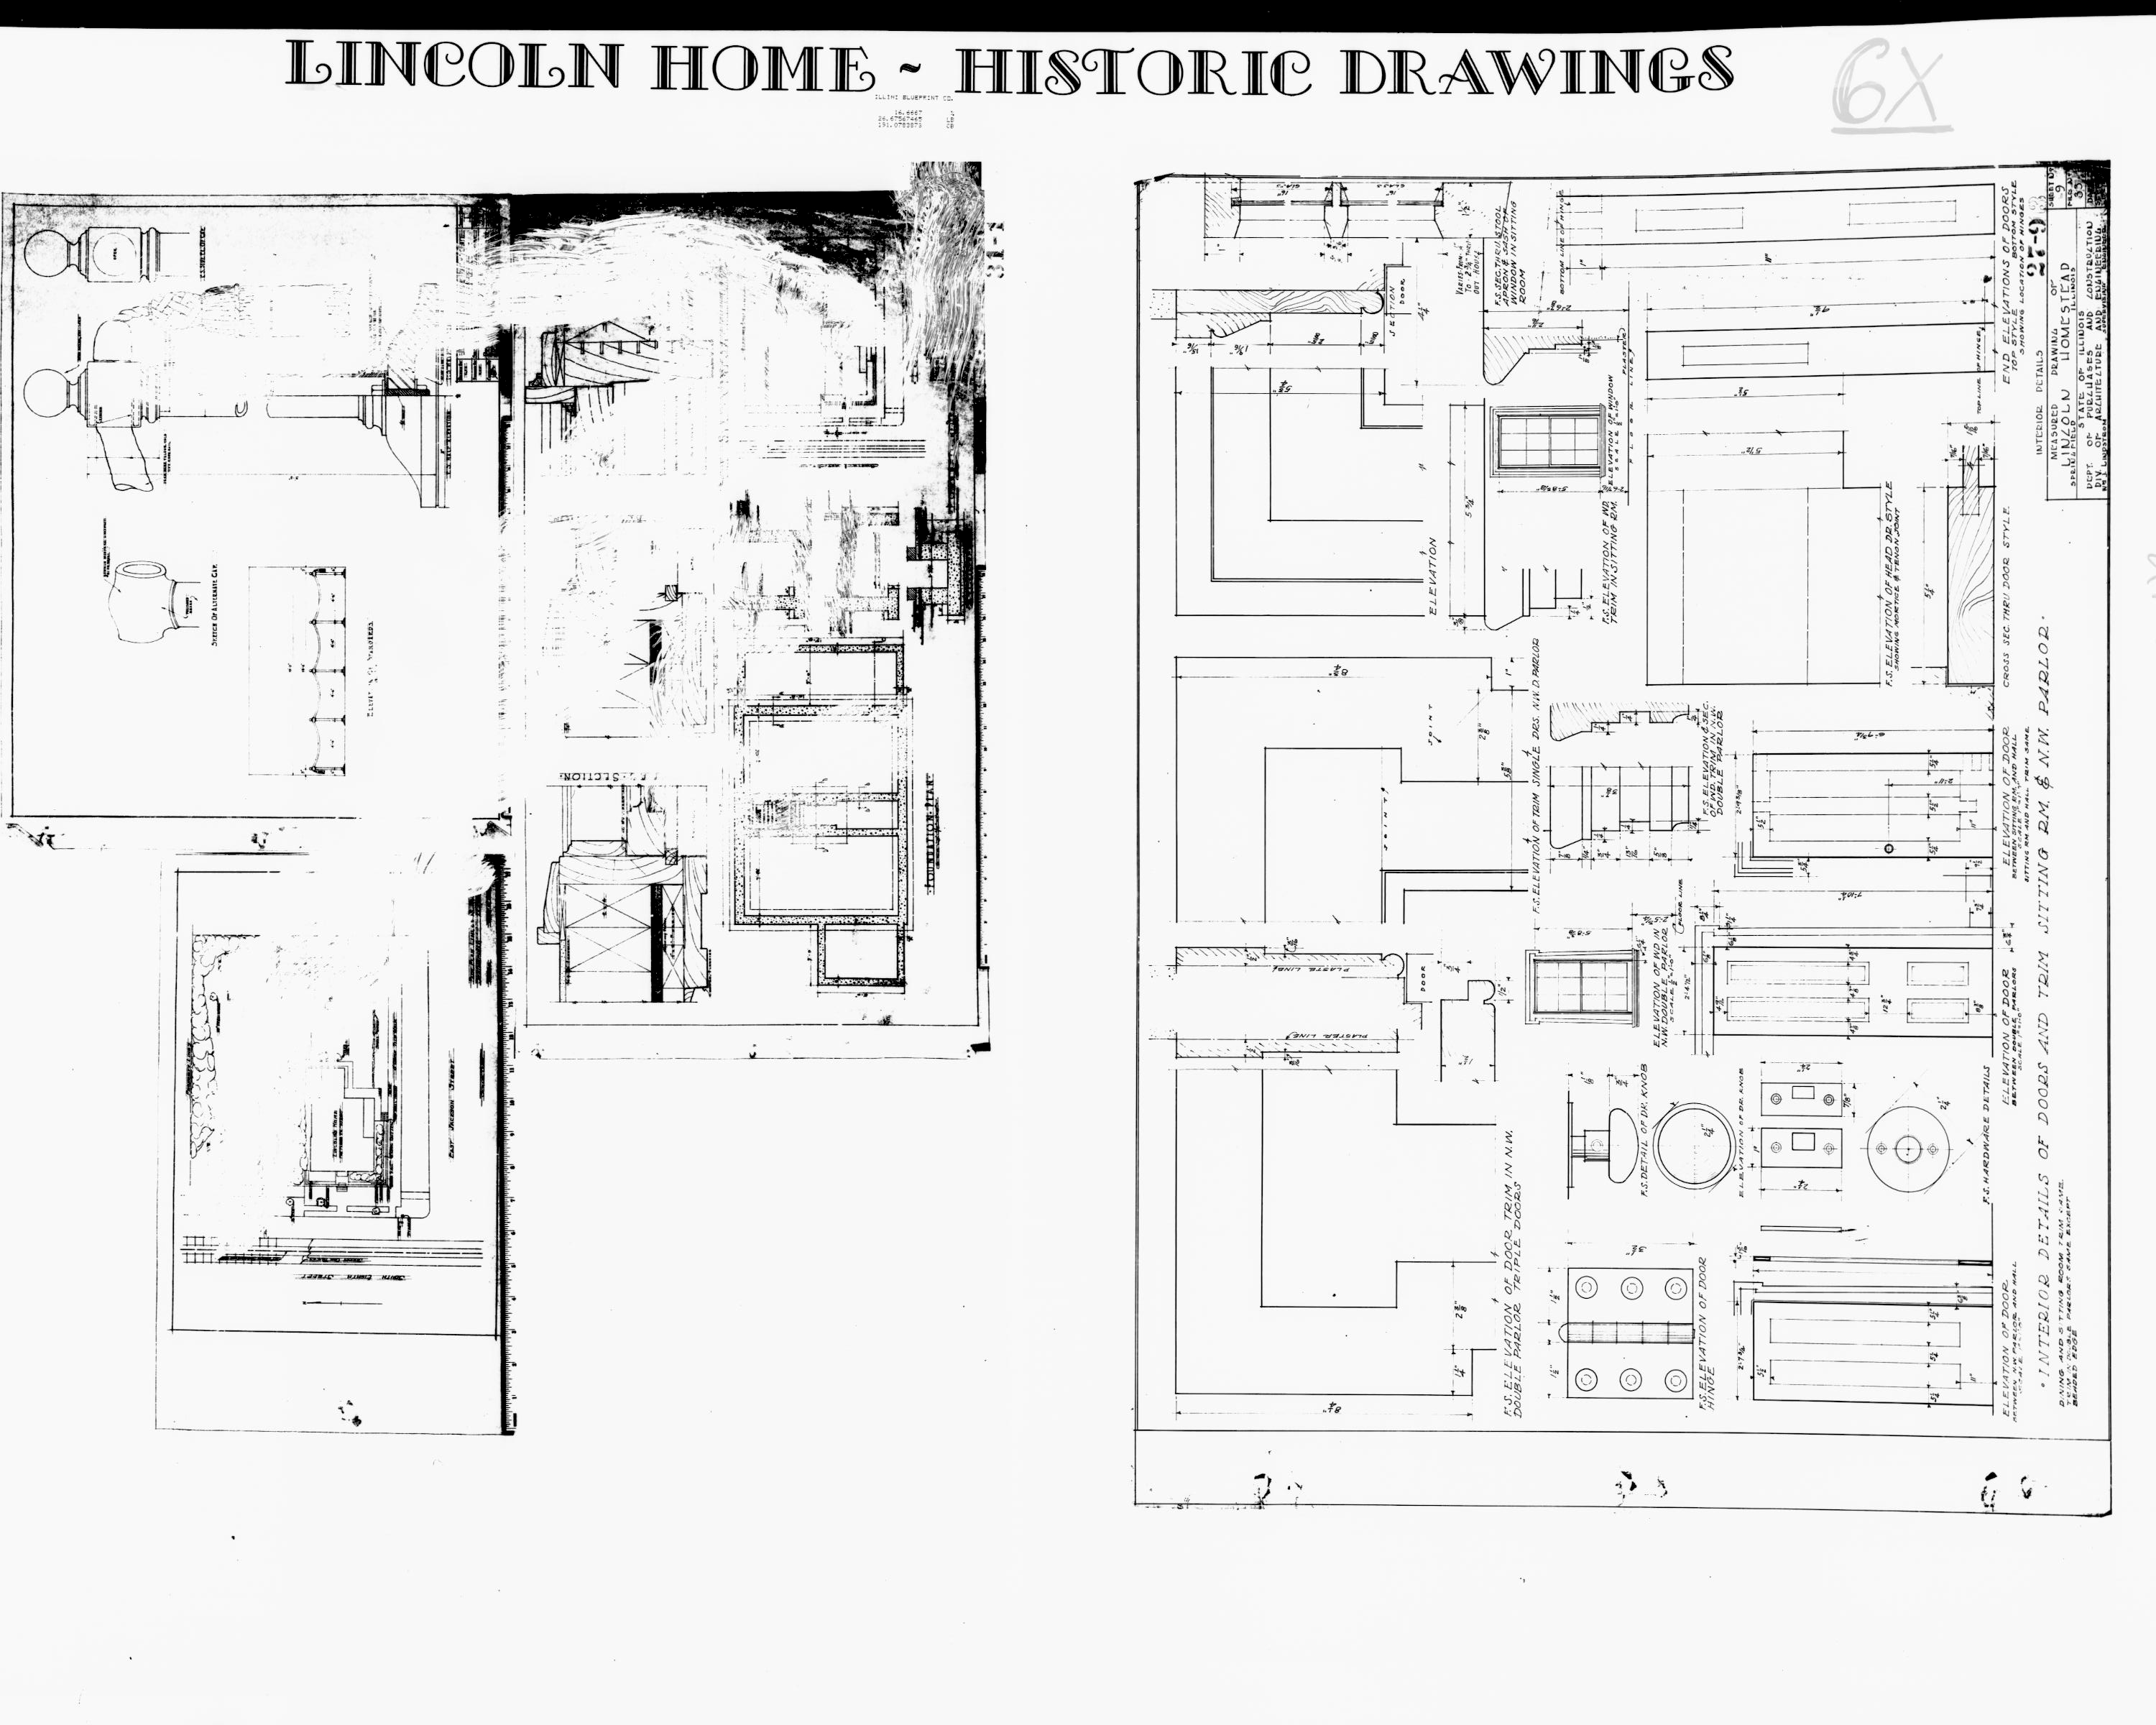 Lincoln Home - Historic Drawings - Interior Details - Measured Drawing 11 Lincoln, home, historic drawings, Interior Details